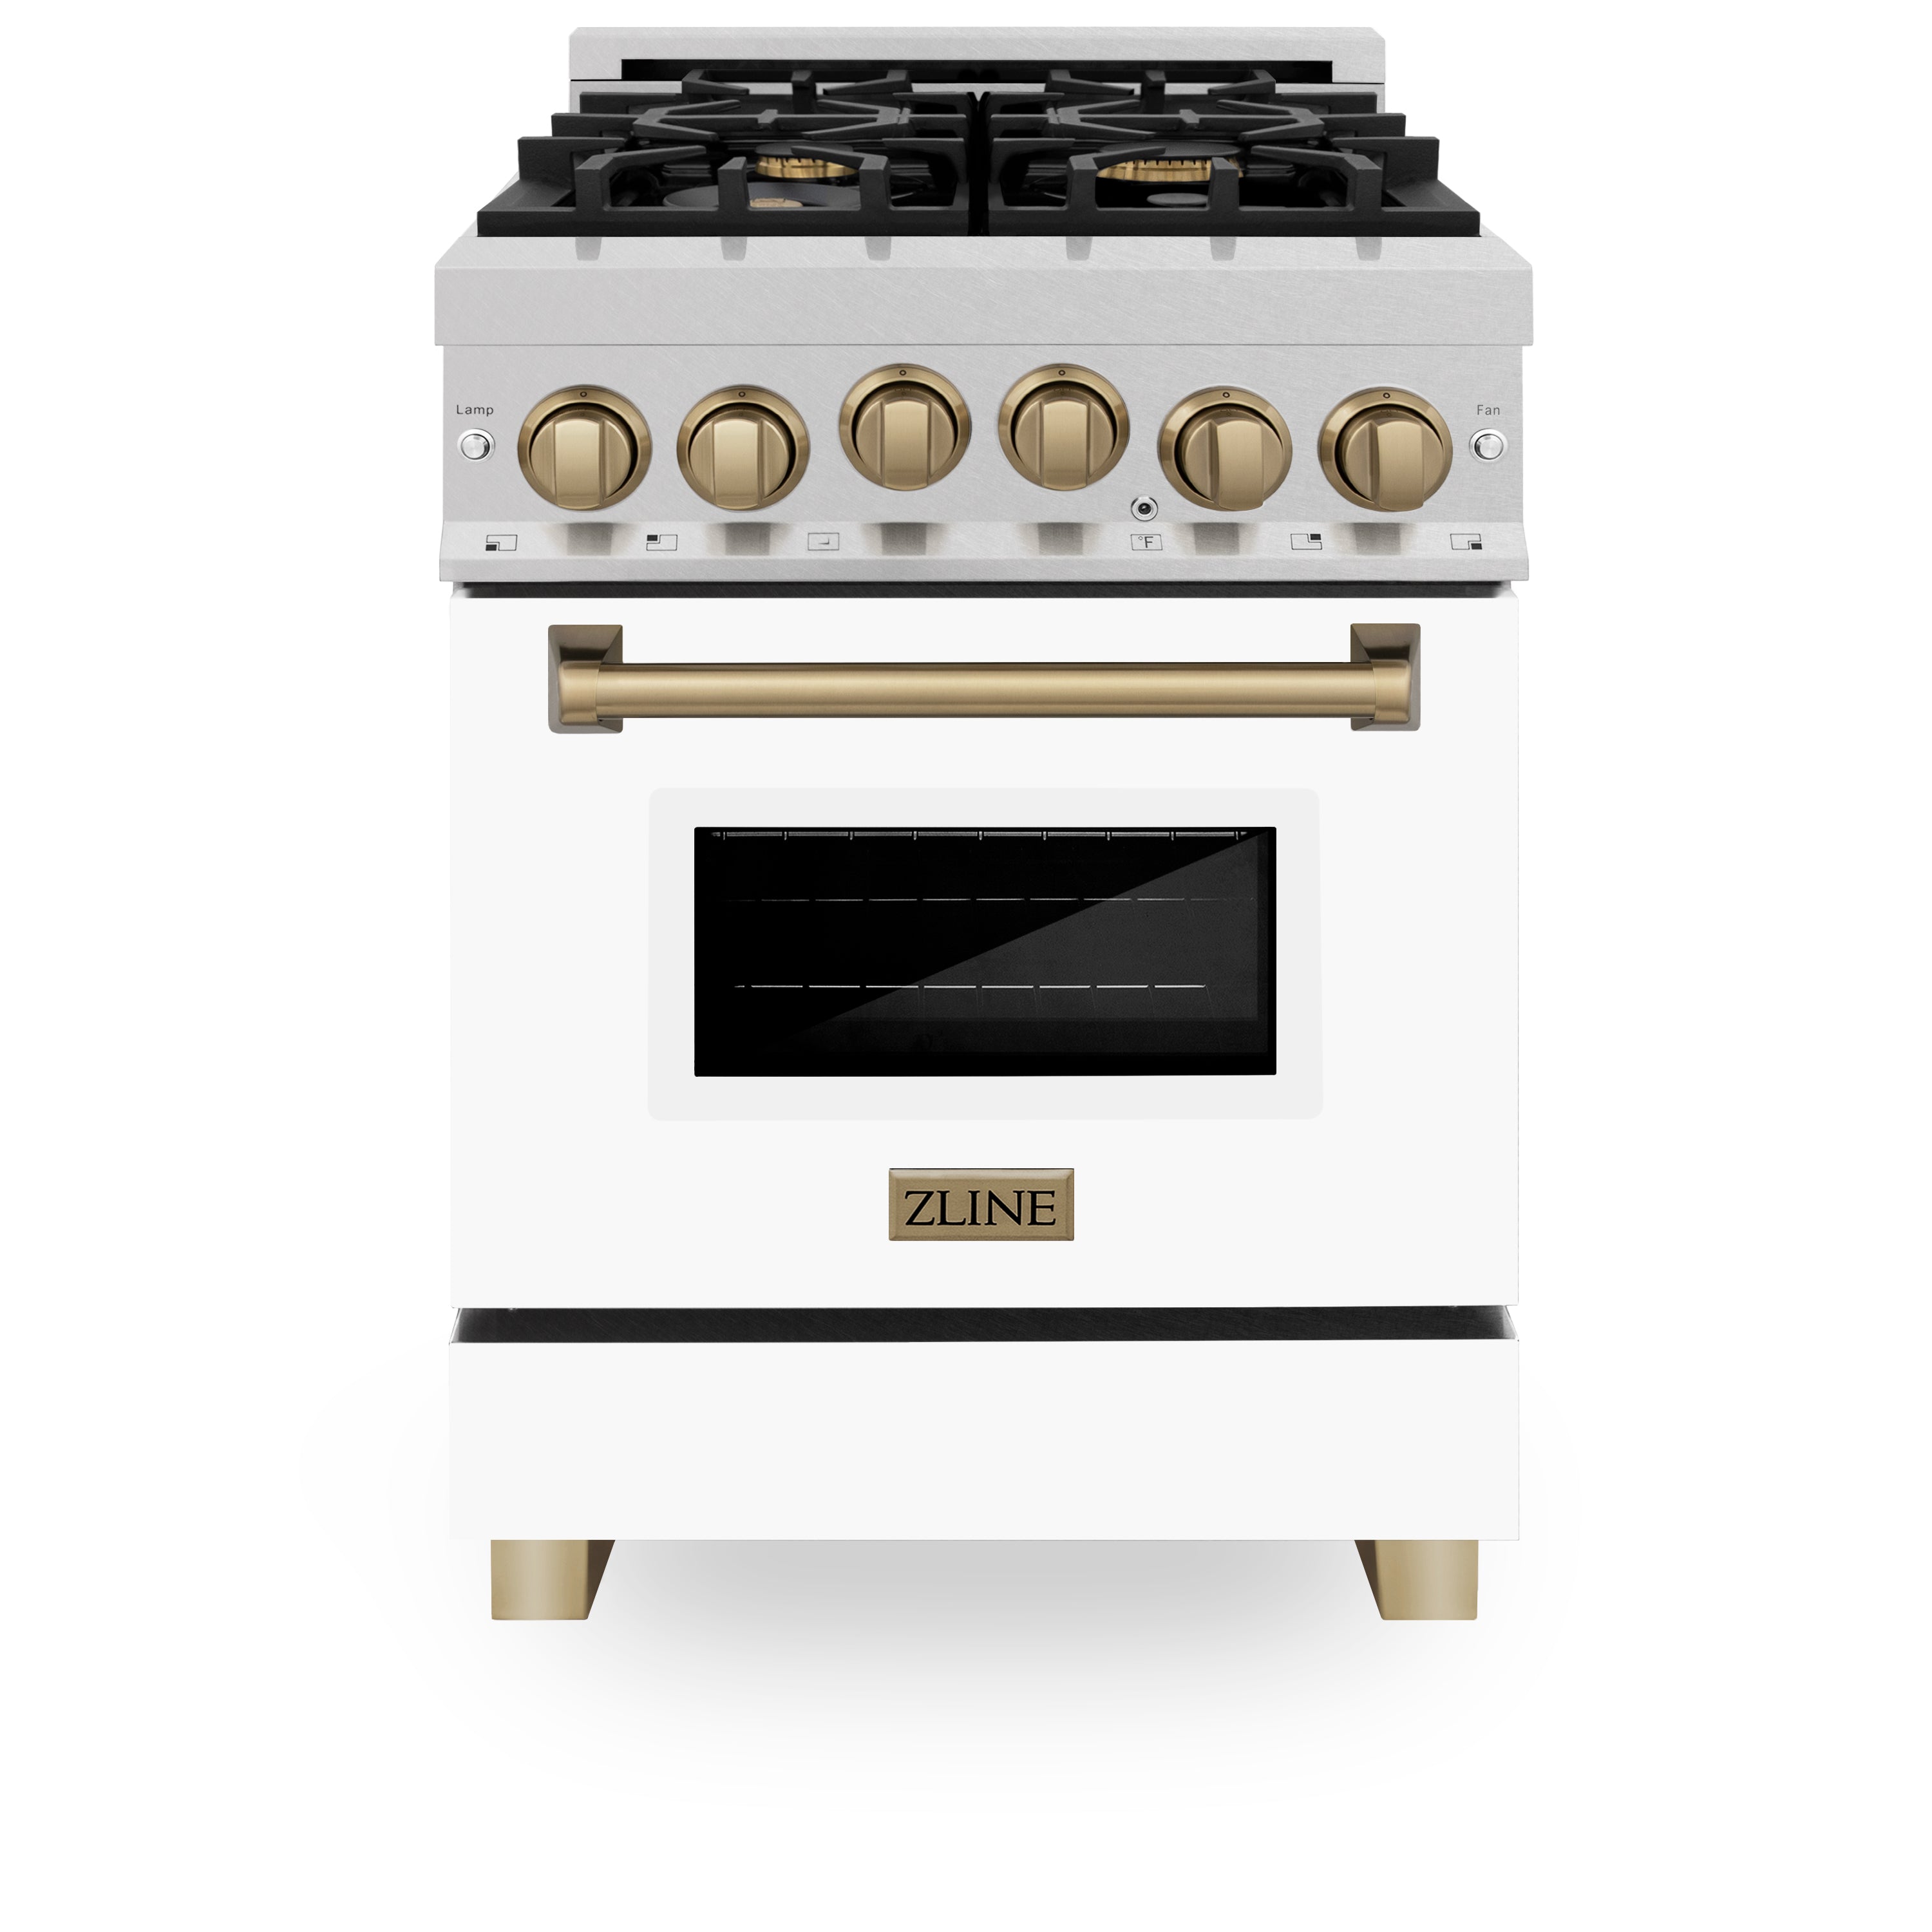 ZLINE Autograph Edition 24" 2.8 cu. ft. Range with Gas Stove and Gas Oven in Fingerprint Resistant Stainless Steel with White Matte Door and Champagne Bronze Accents (RGSZ-WM-24-CB)